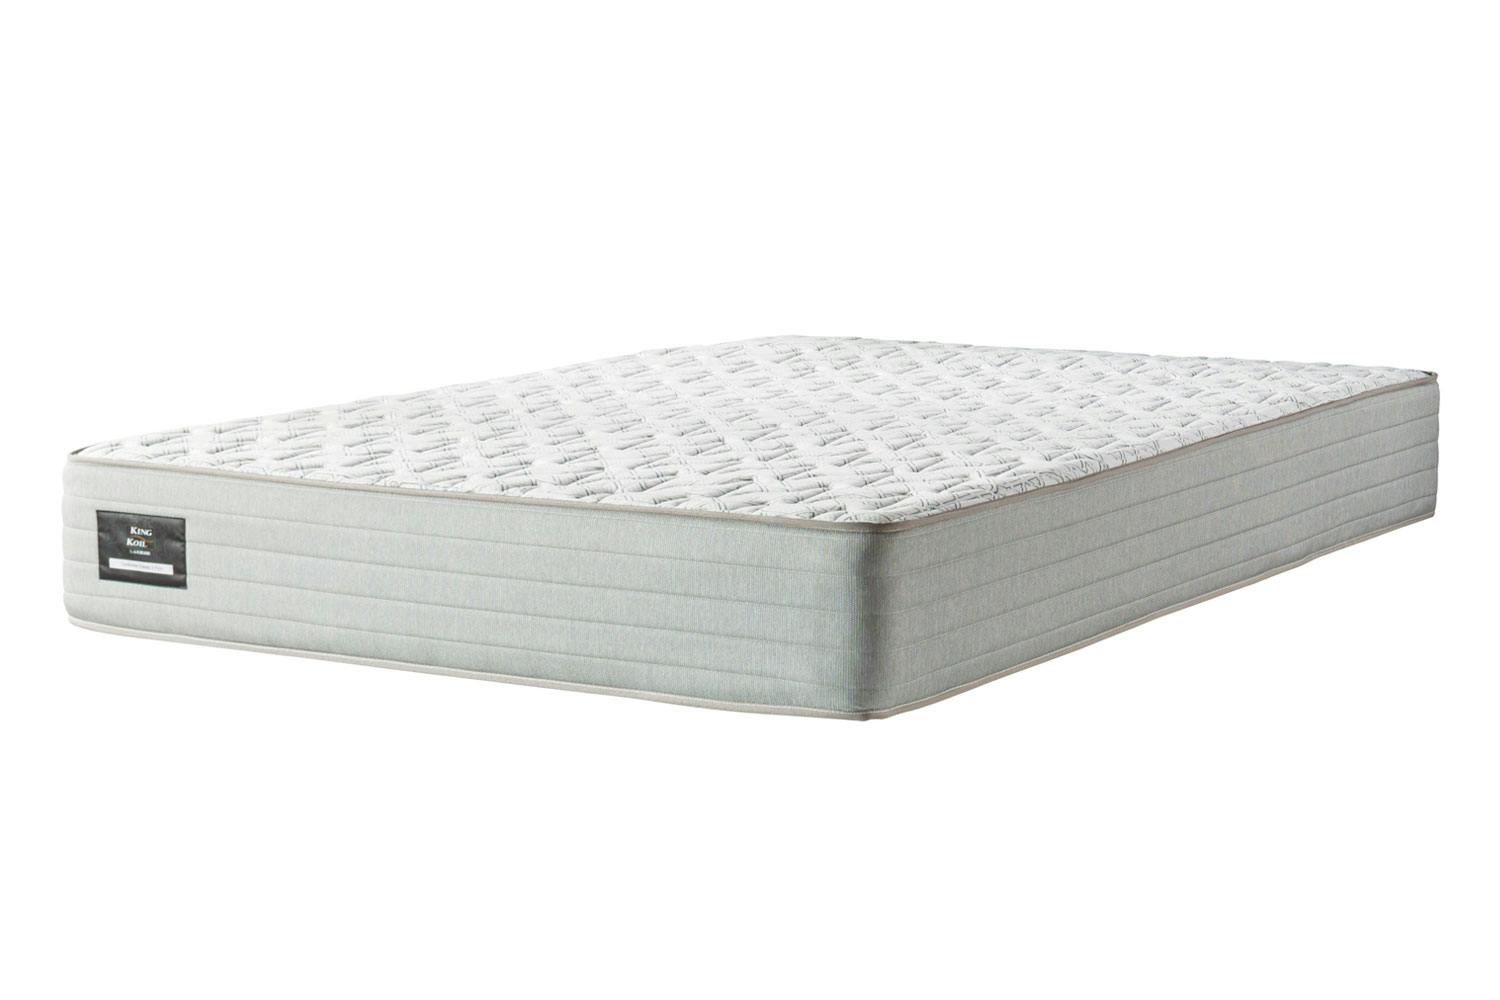 Conforma Classic II Firm Double Mattress by King Koil